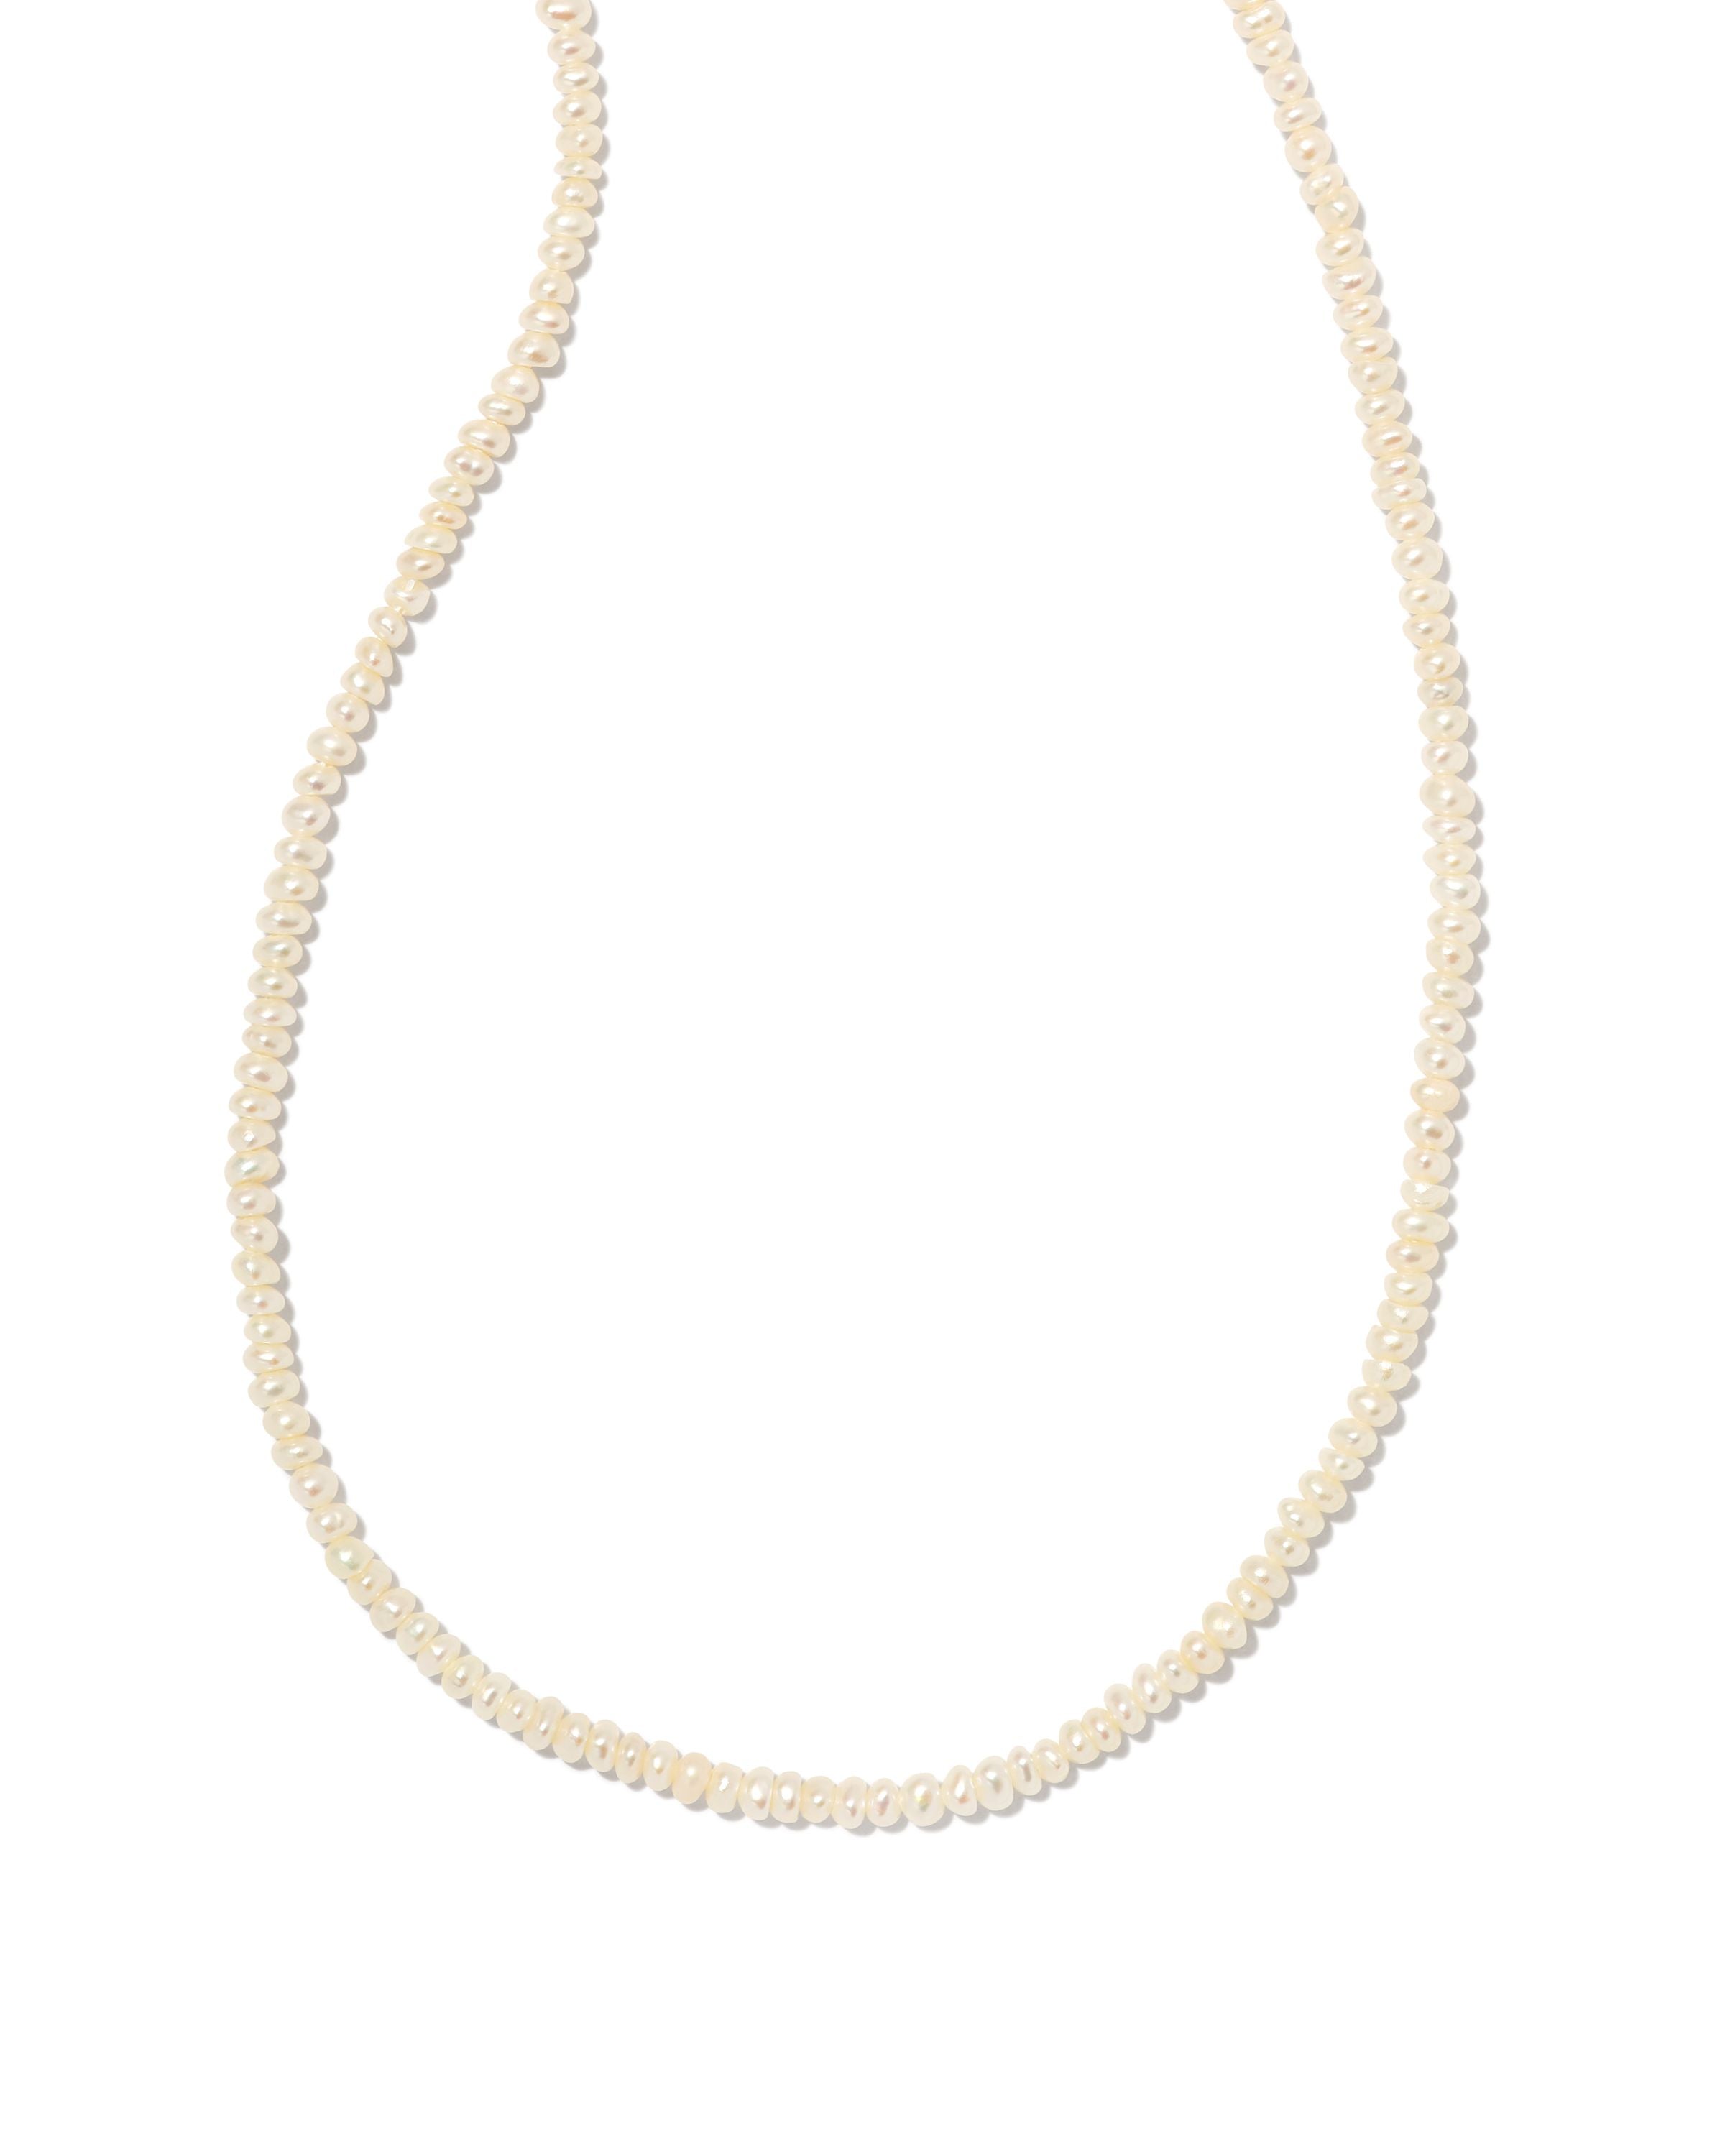 KENDRA SCOTT LOLO STRAND NECKLACE IN GOLD WHITE PEARL